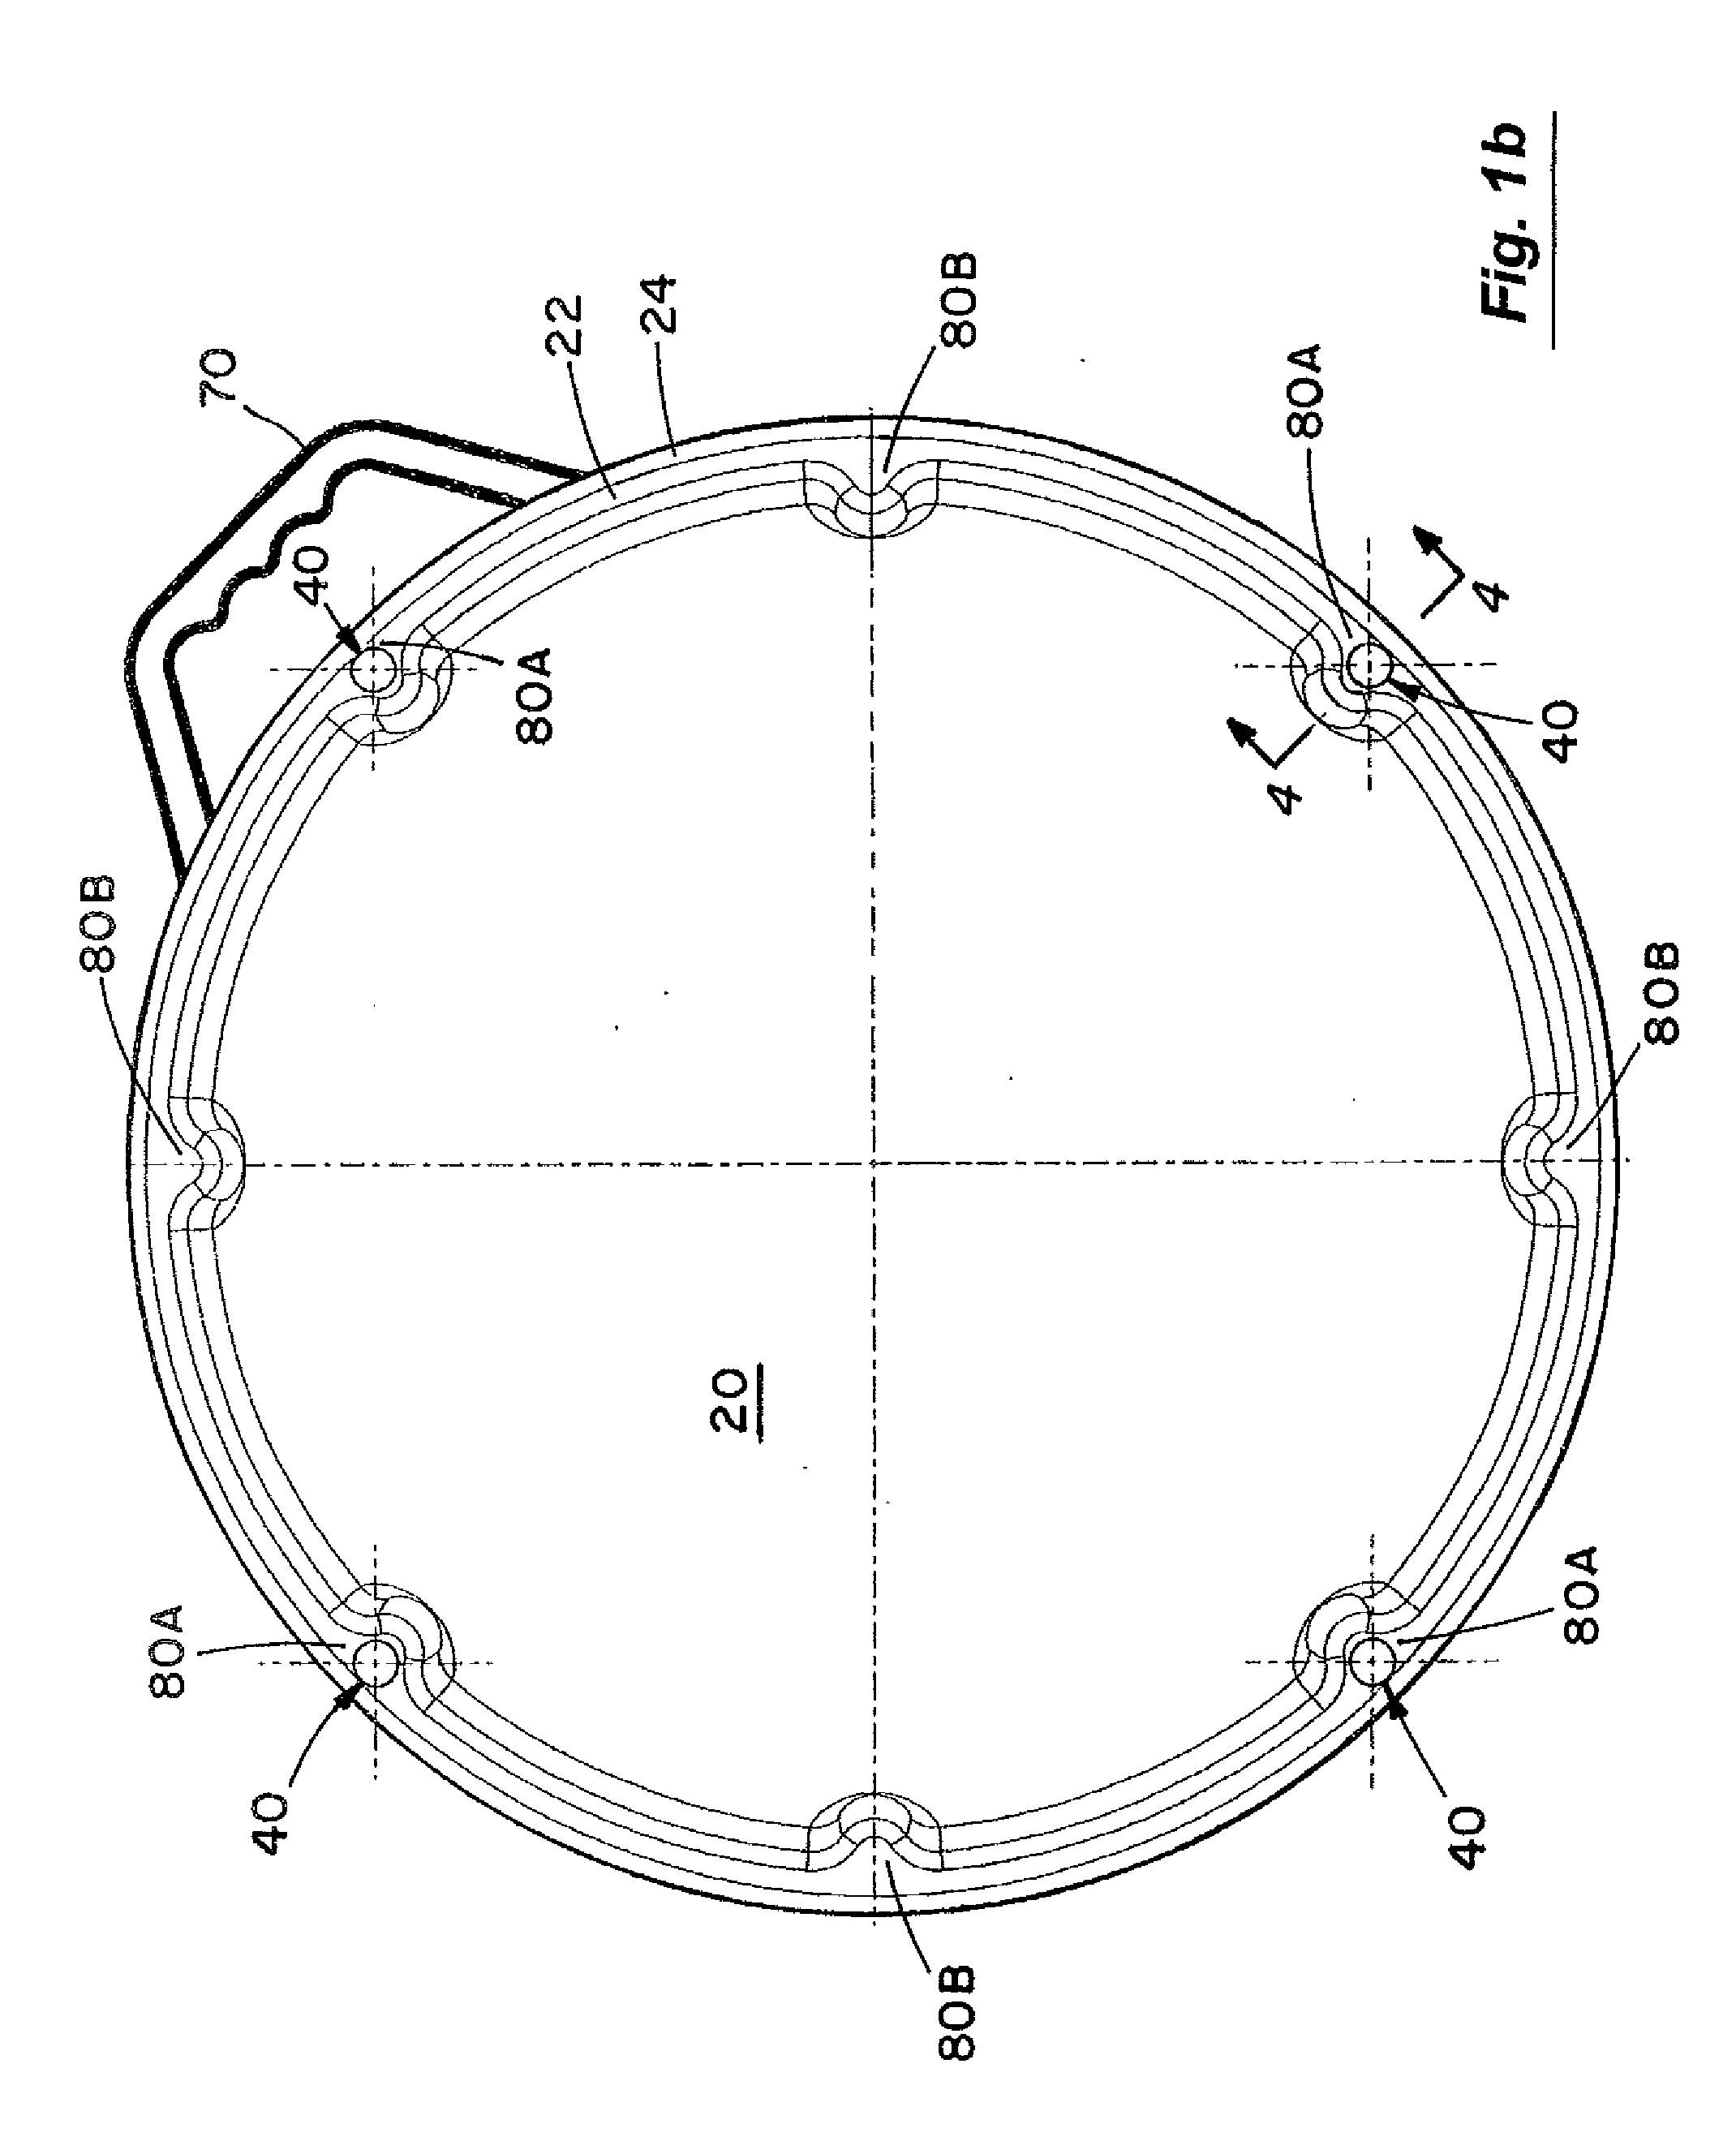 Apparatus and method for quickly releasing a dome in a domed satellite antenna